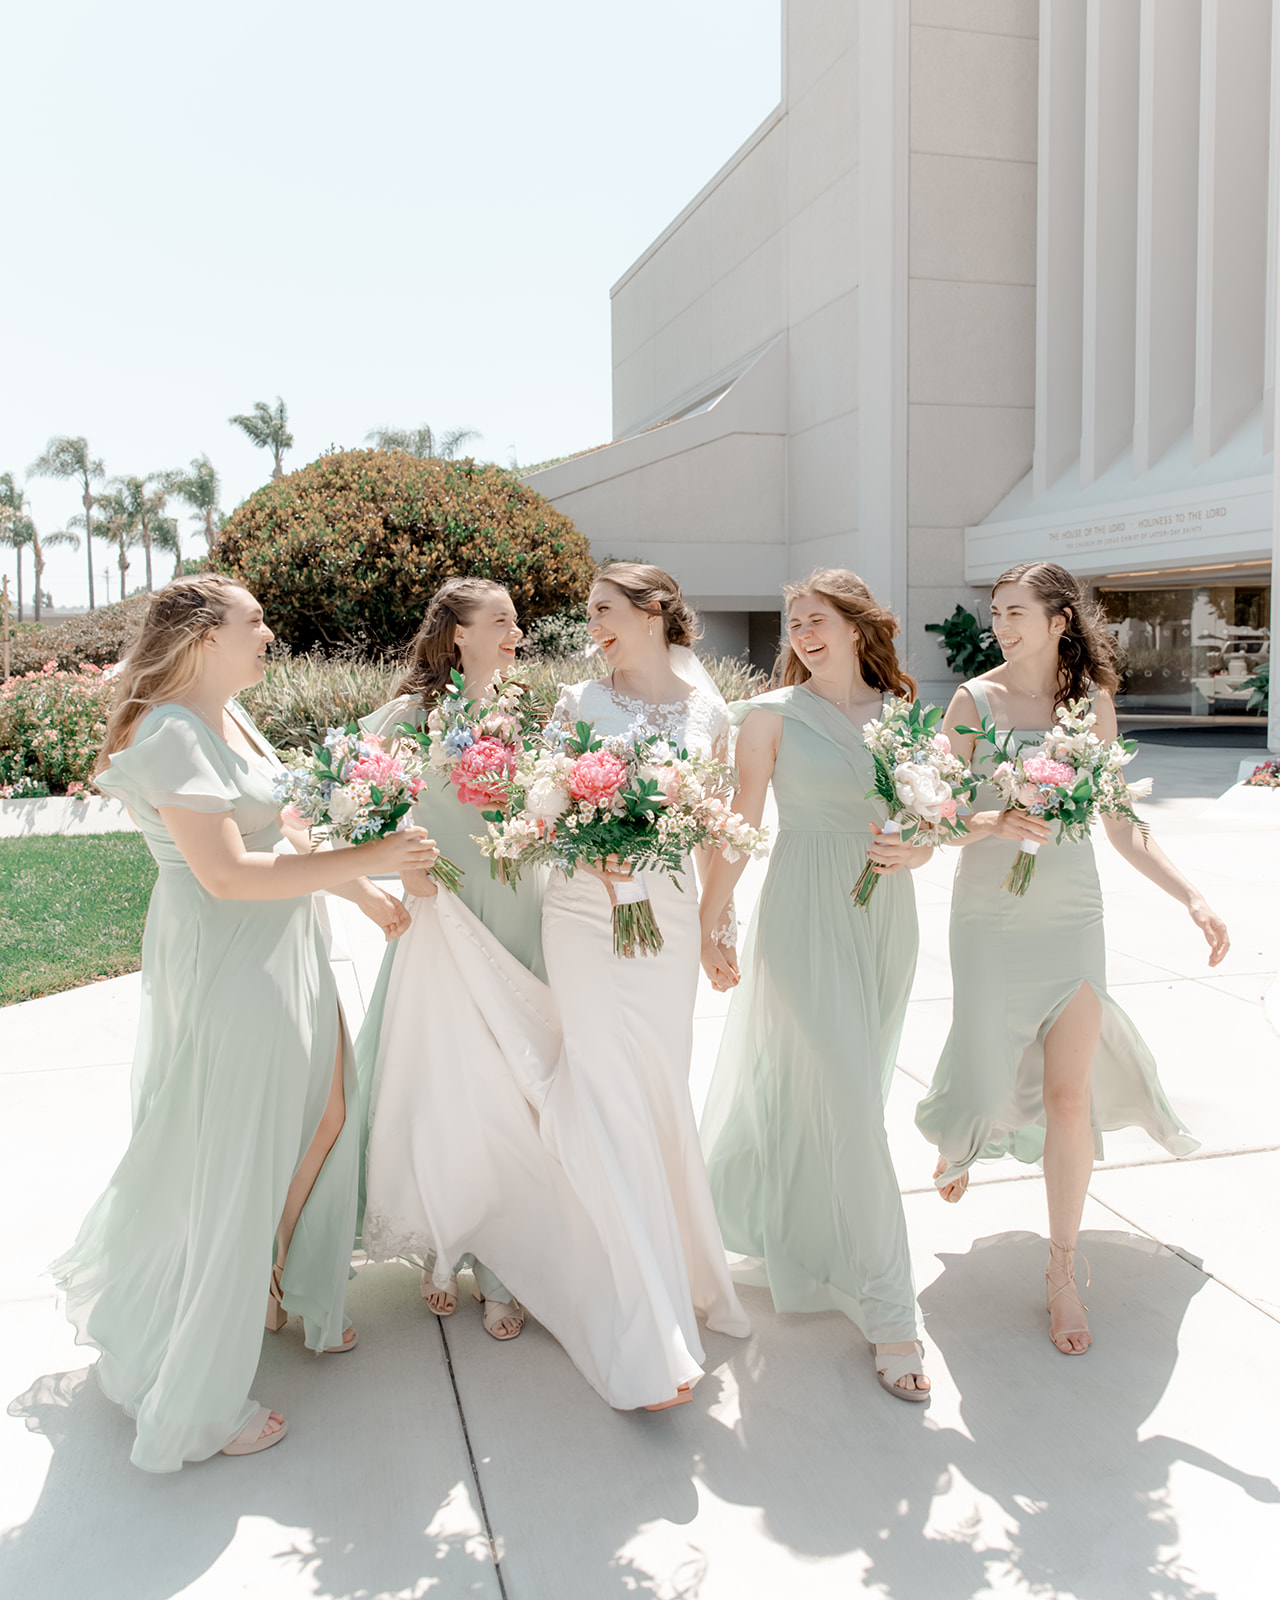 A bride in a white silk dress walks through a park with her bridesmaids in sage dresses all holding white and pink bouquets